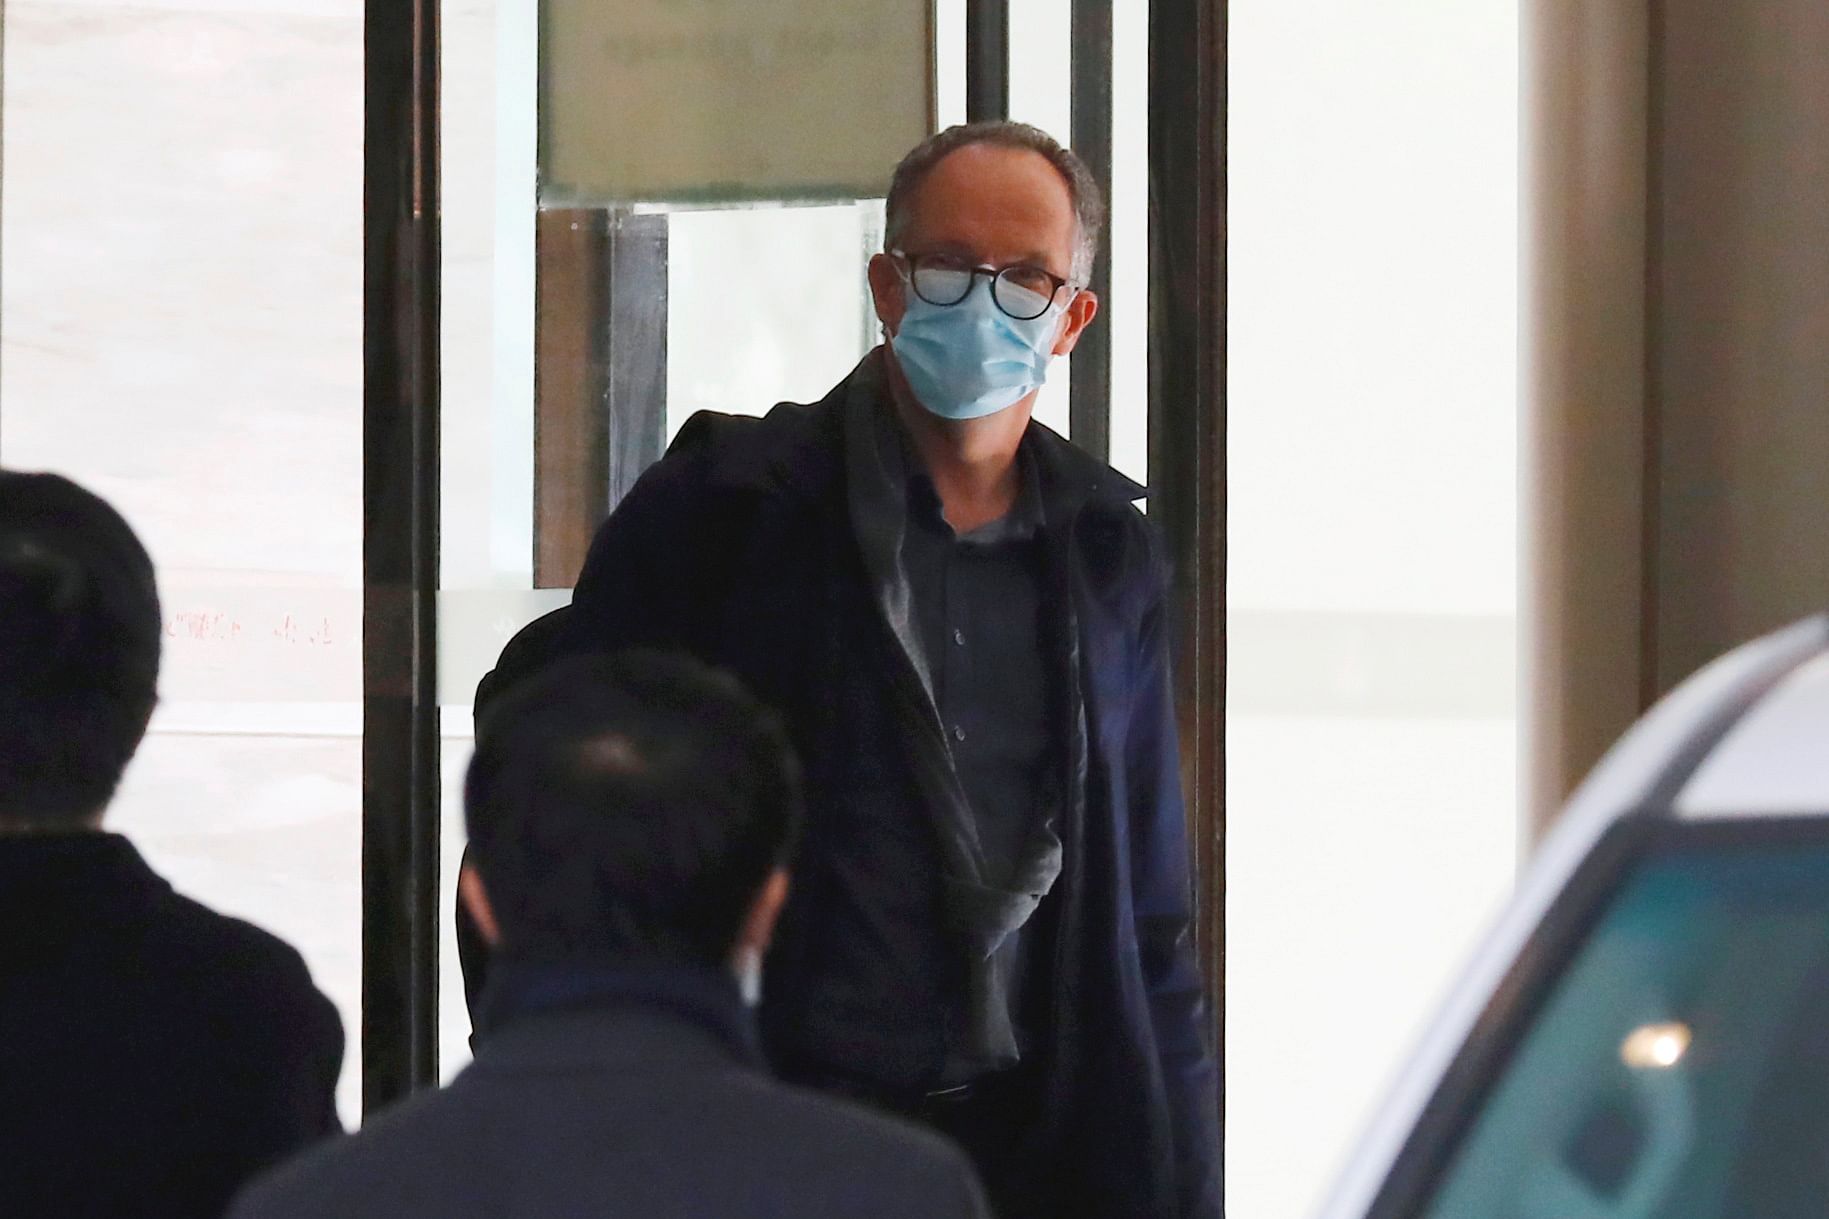 Peter Ben Embarek, a member of the World Health Organisation (WHO) team tasked with investigating the origins of the coronavirus disease (COVID-19), leaves his quarantine hotel in Wuhan, Hubei province, China January 28, 2021. Credit: REUTERS